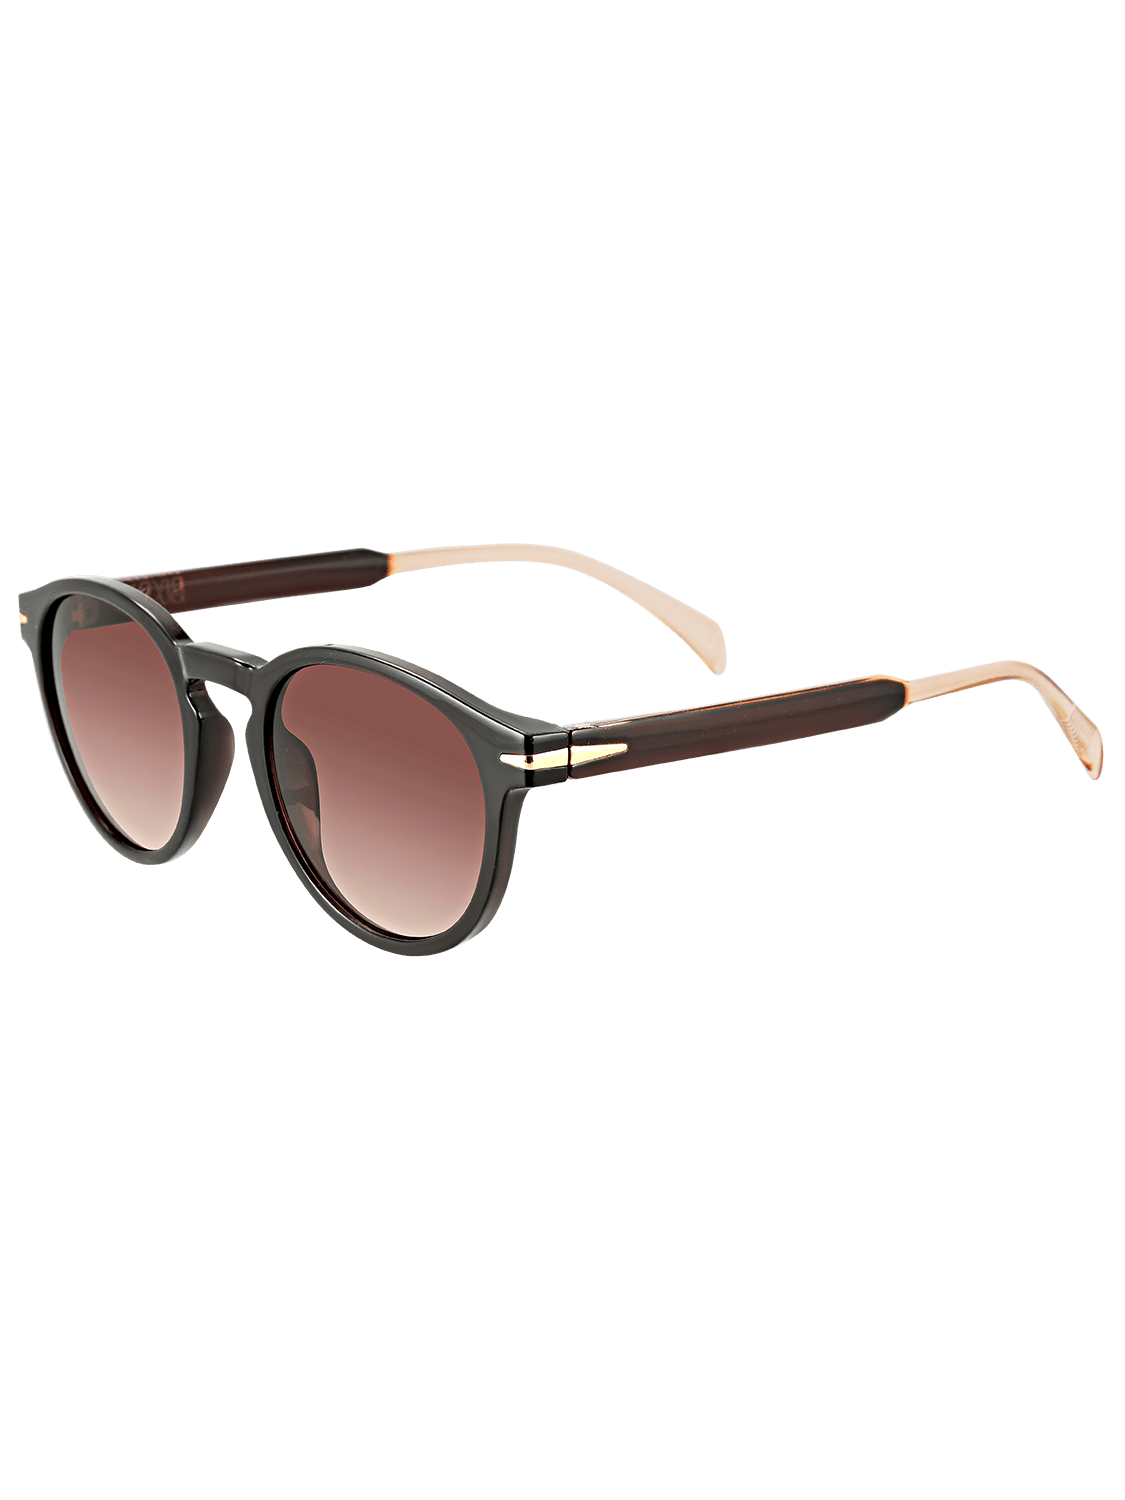 Men’s sunglasses from Bixby and Co